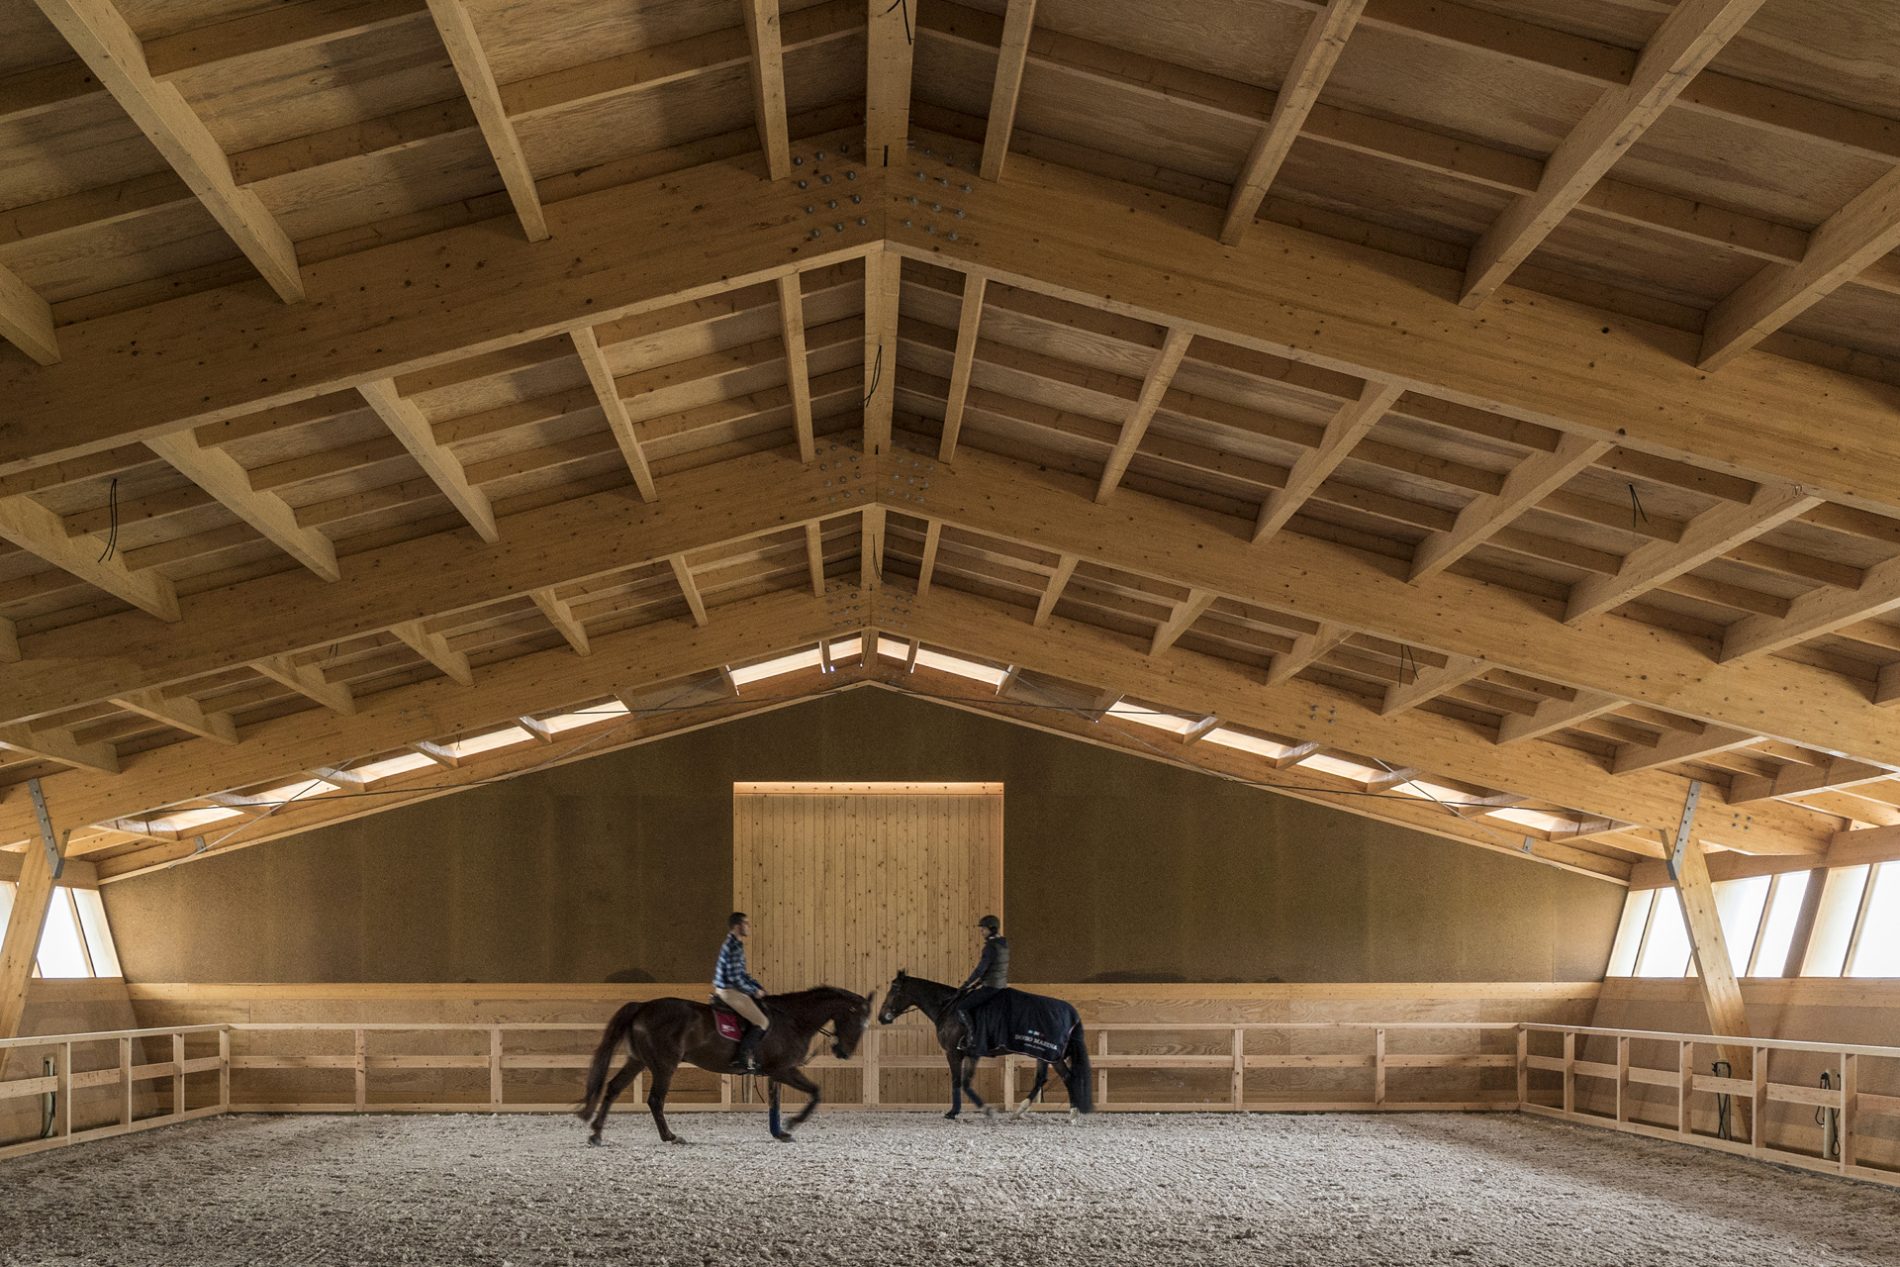 This closed volume becomes an arena for equestrian practice